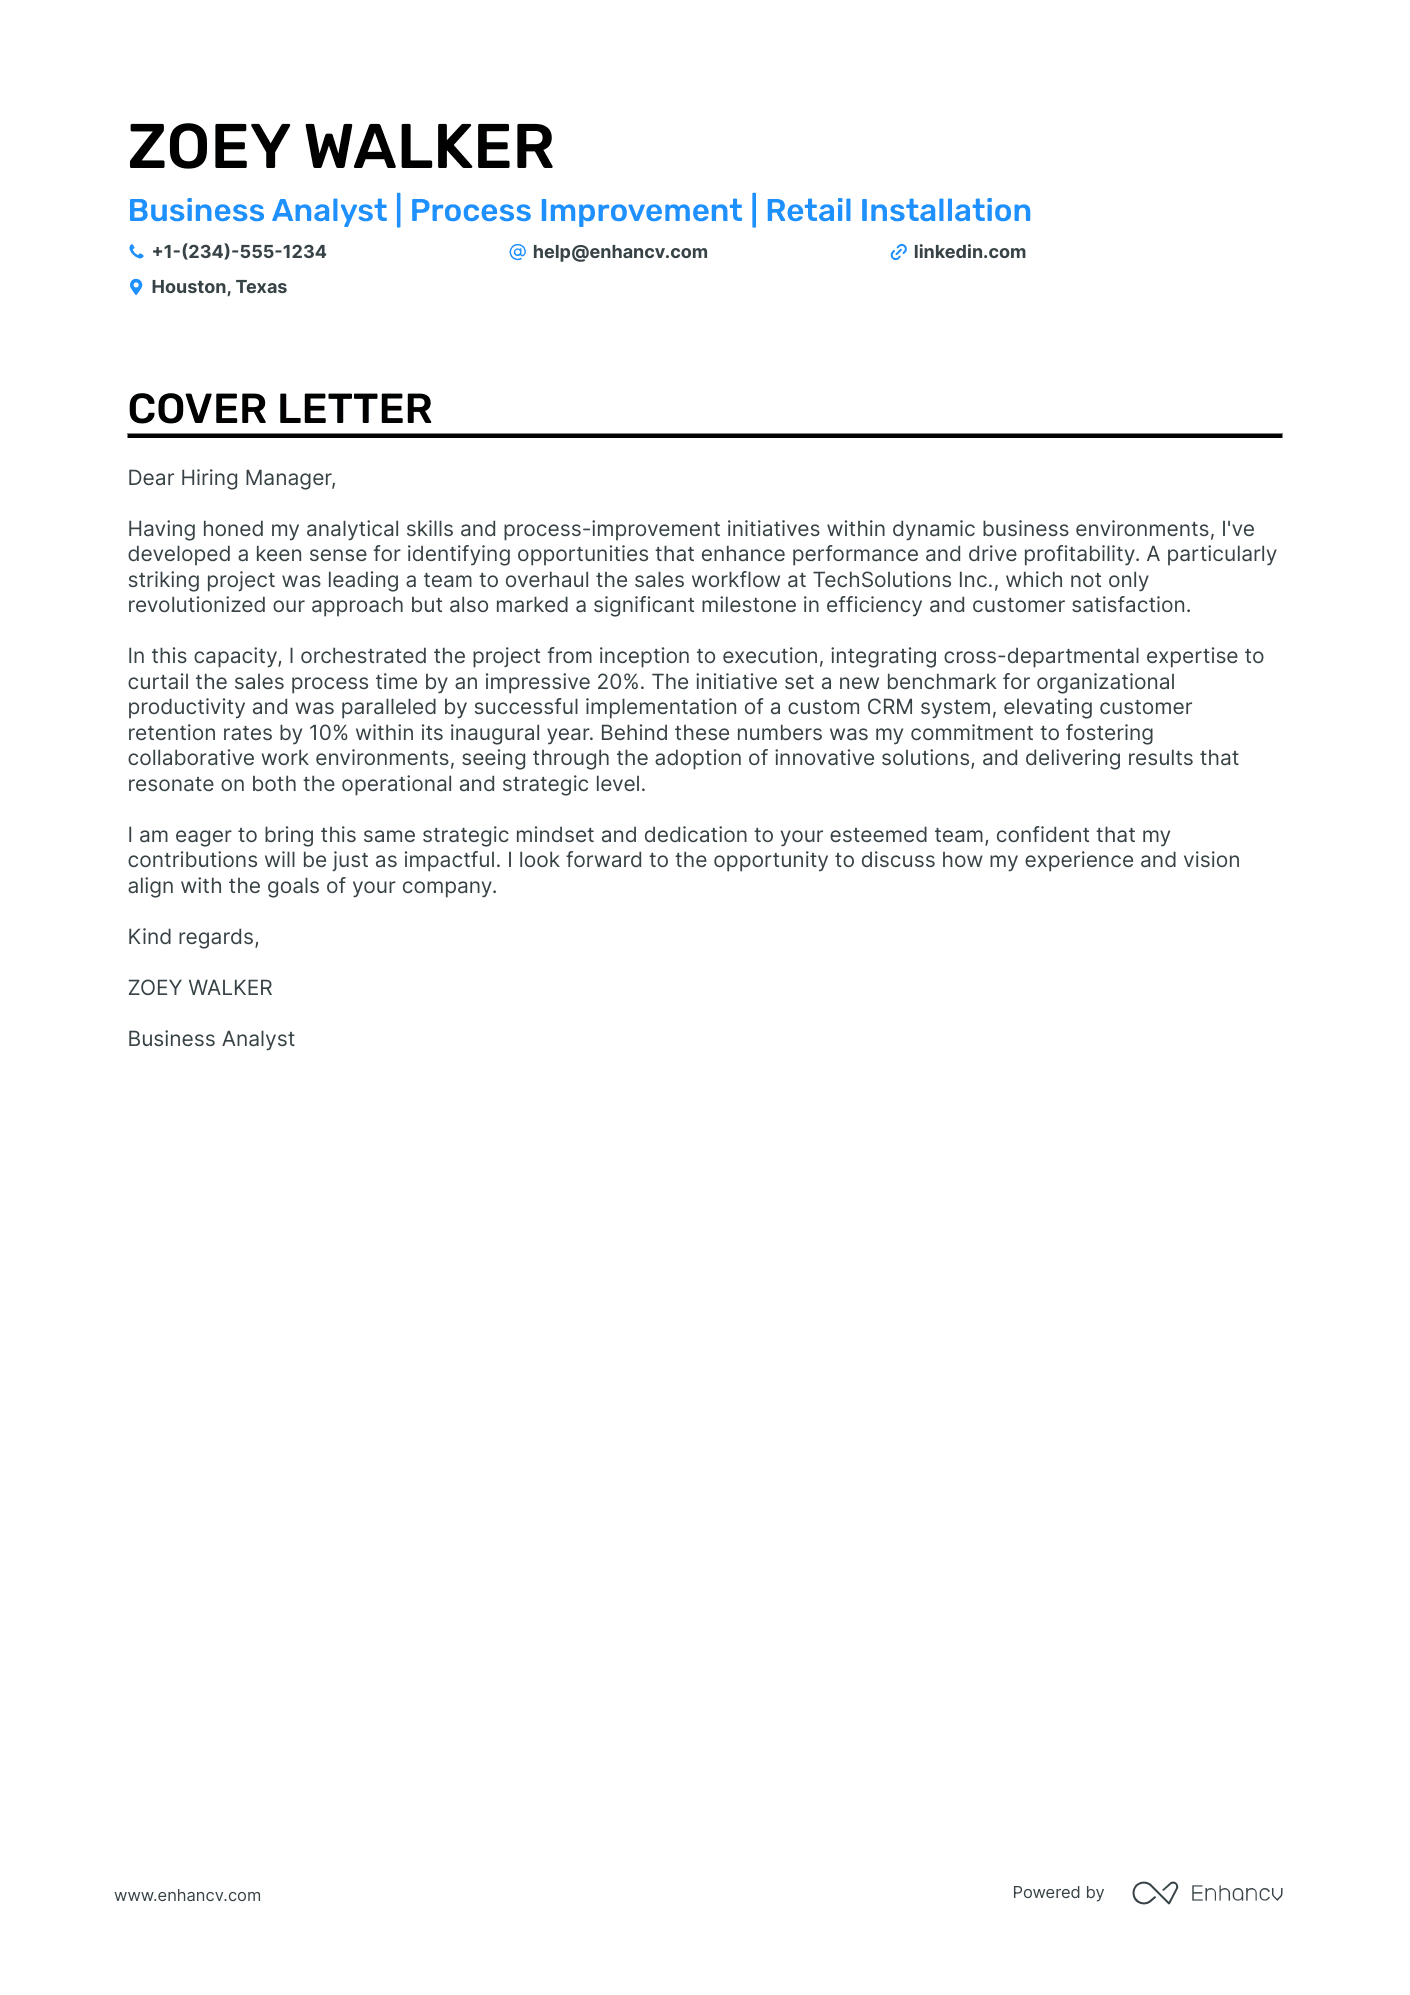 cover letter for the post of a business analyst